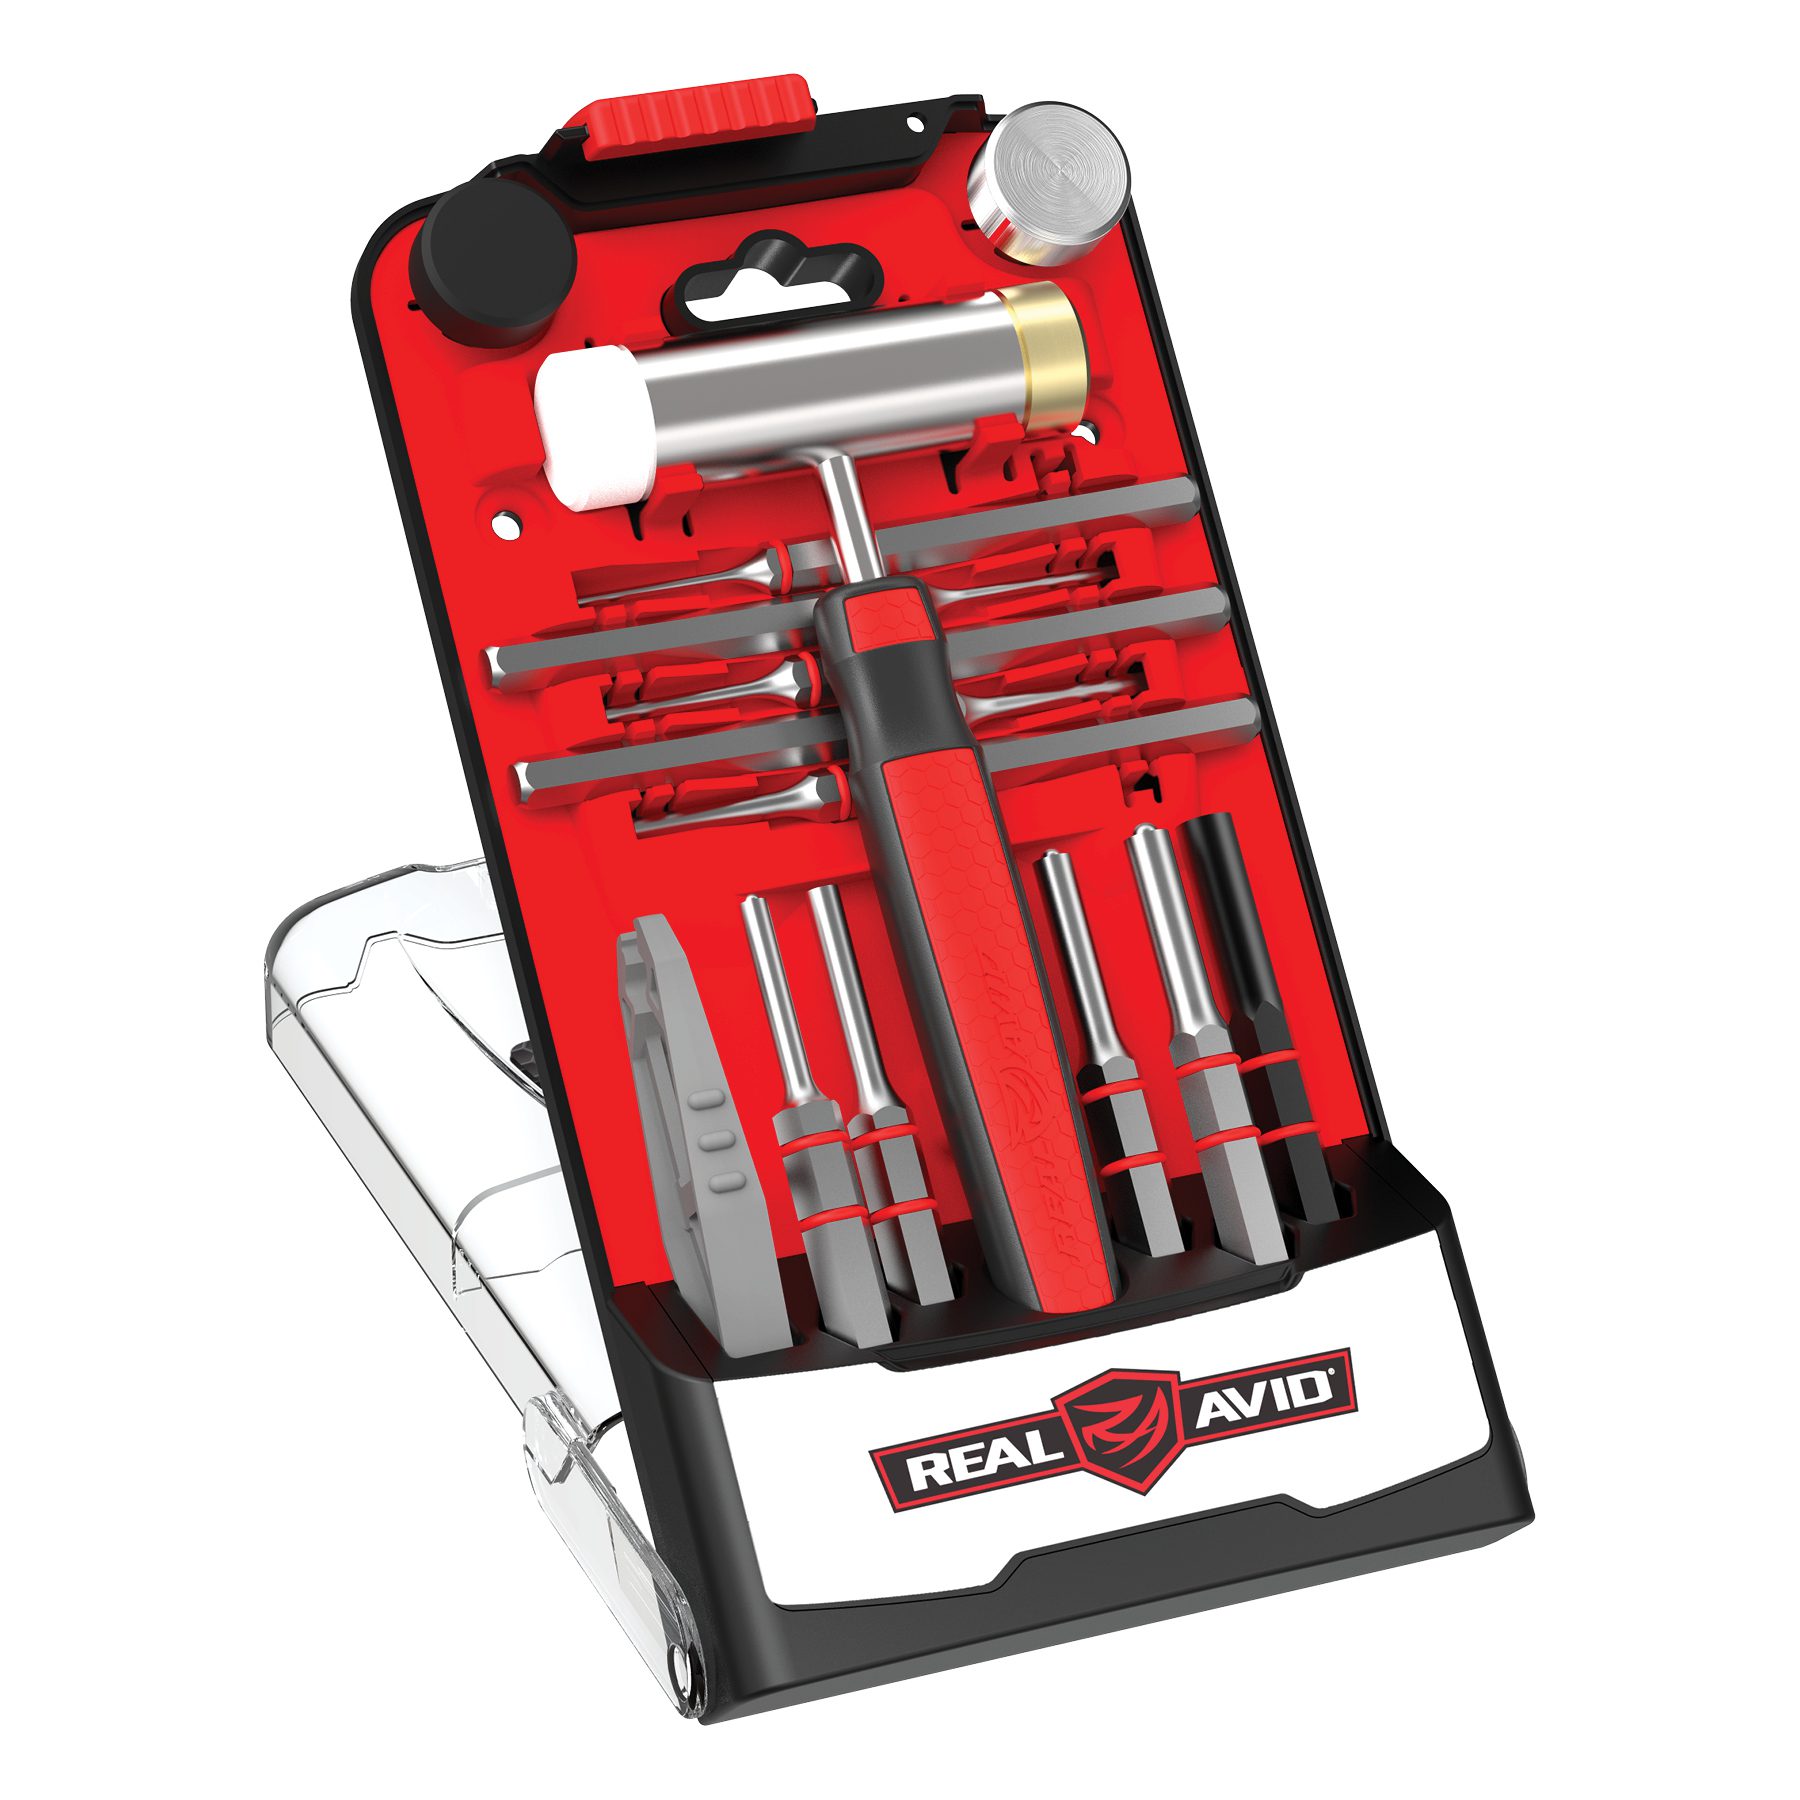 Roll Pin Installation Removal Tool, EZ Red